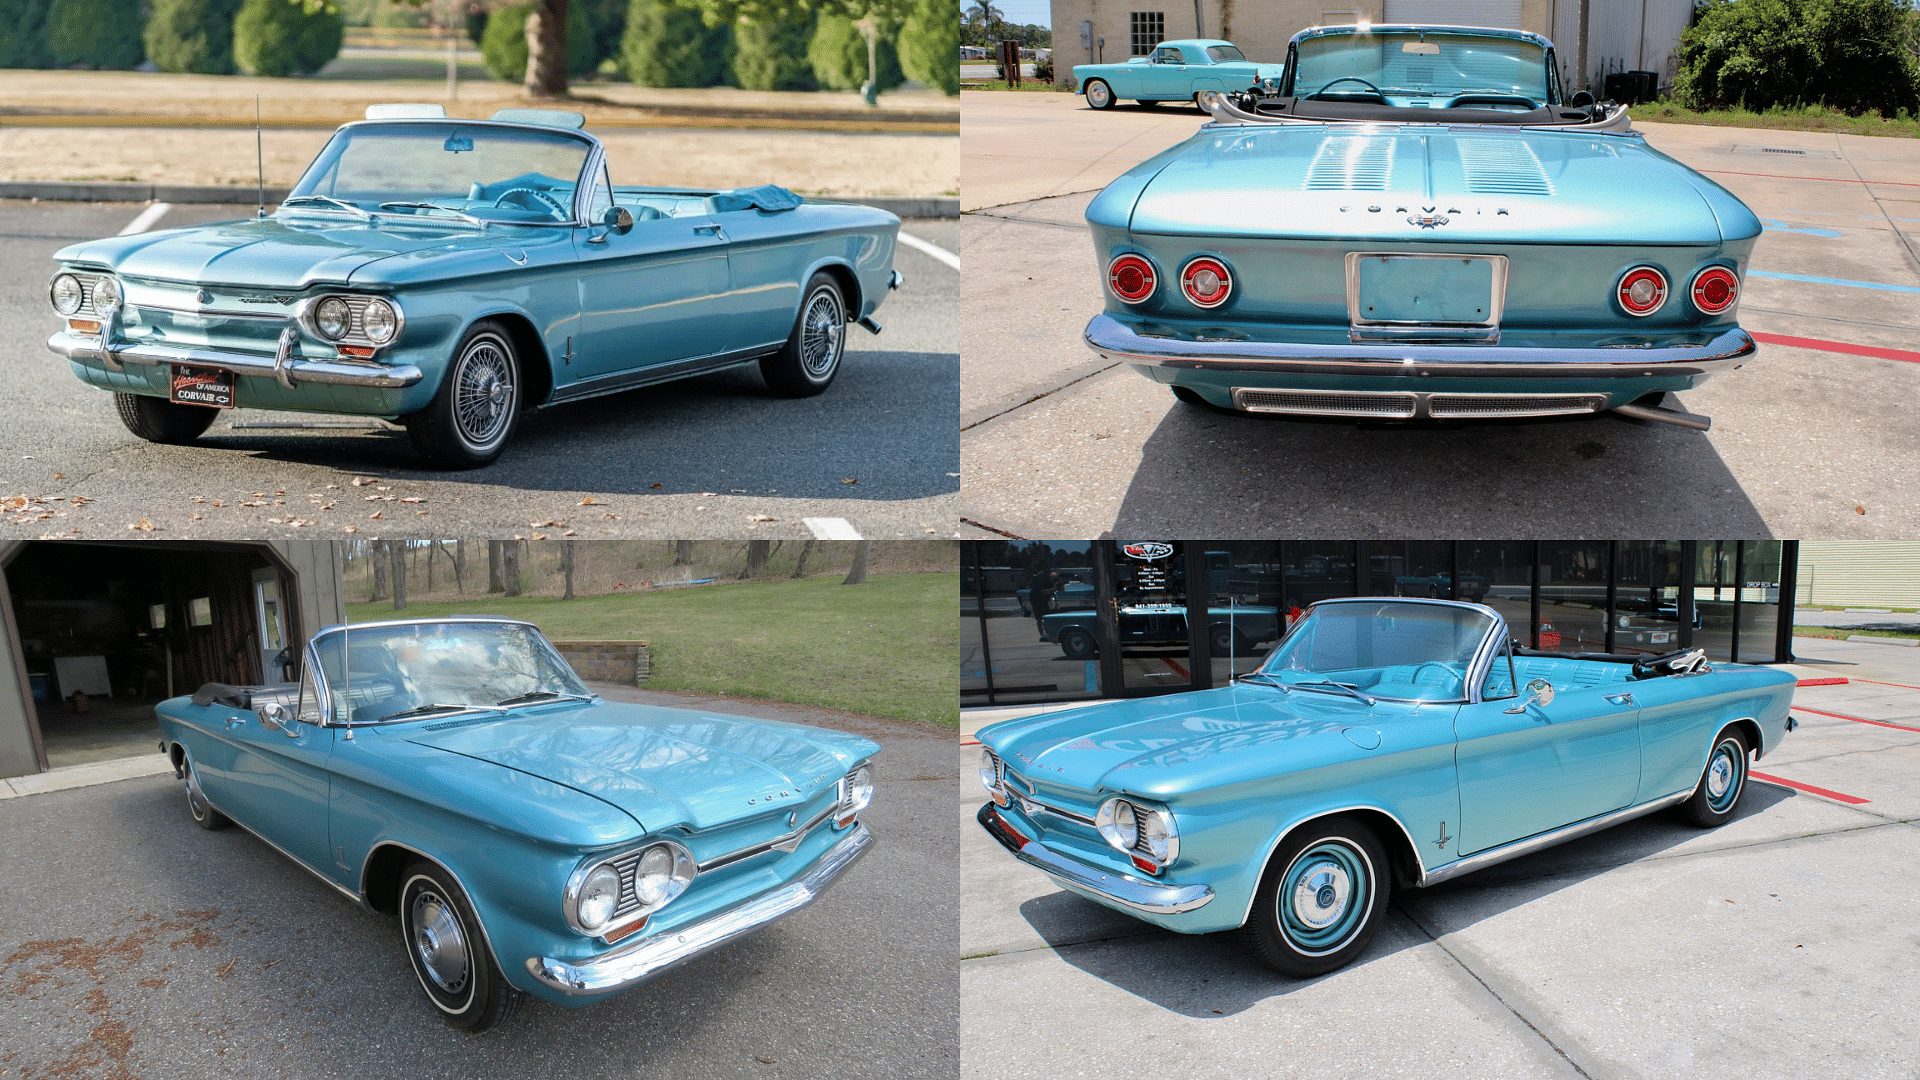 Chevrolet Corvair Monza Convertible front, rear, side view